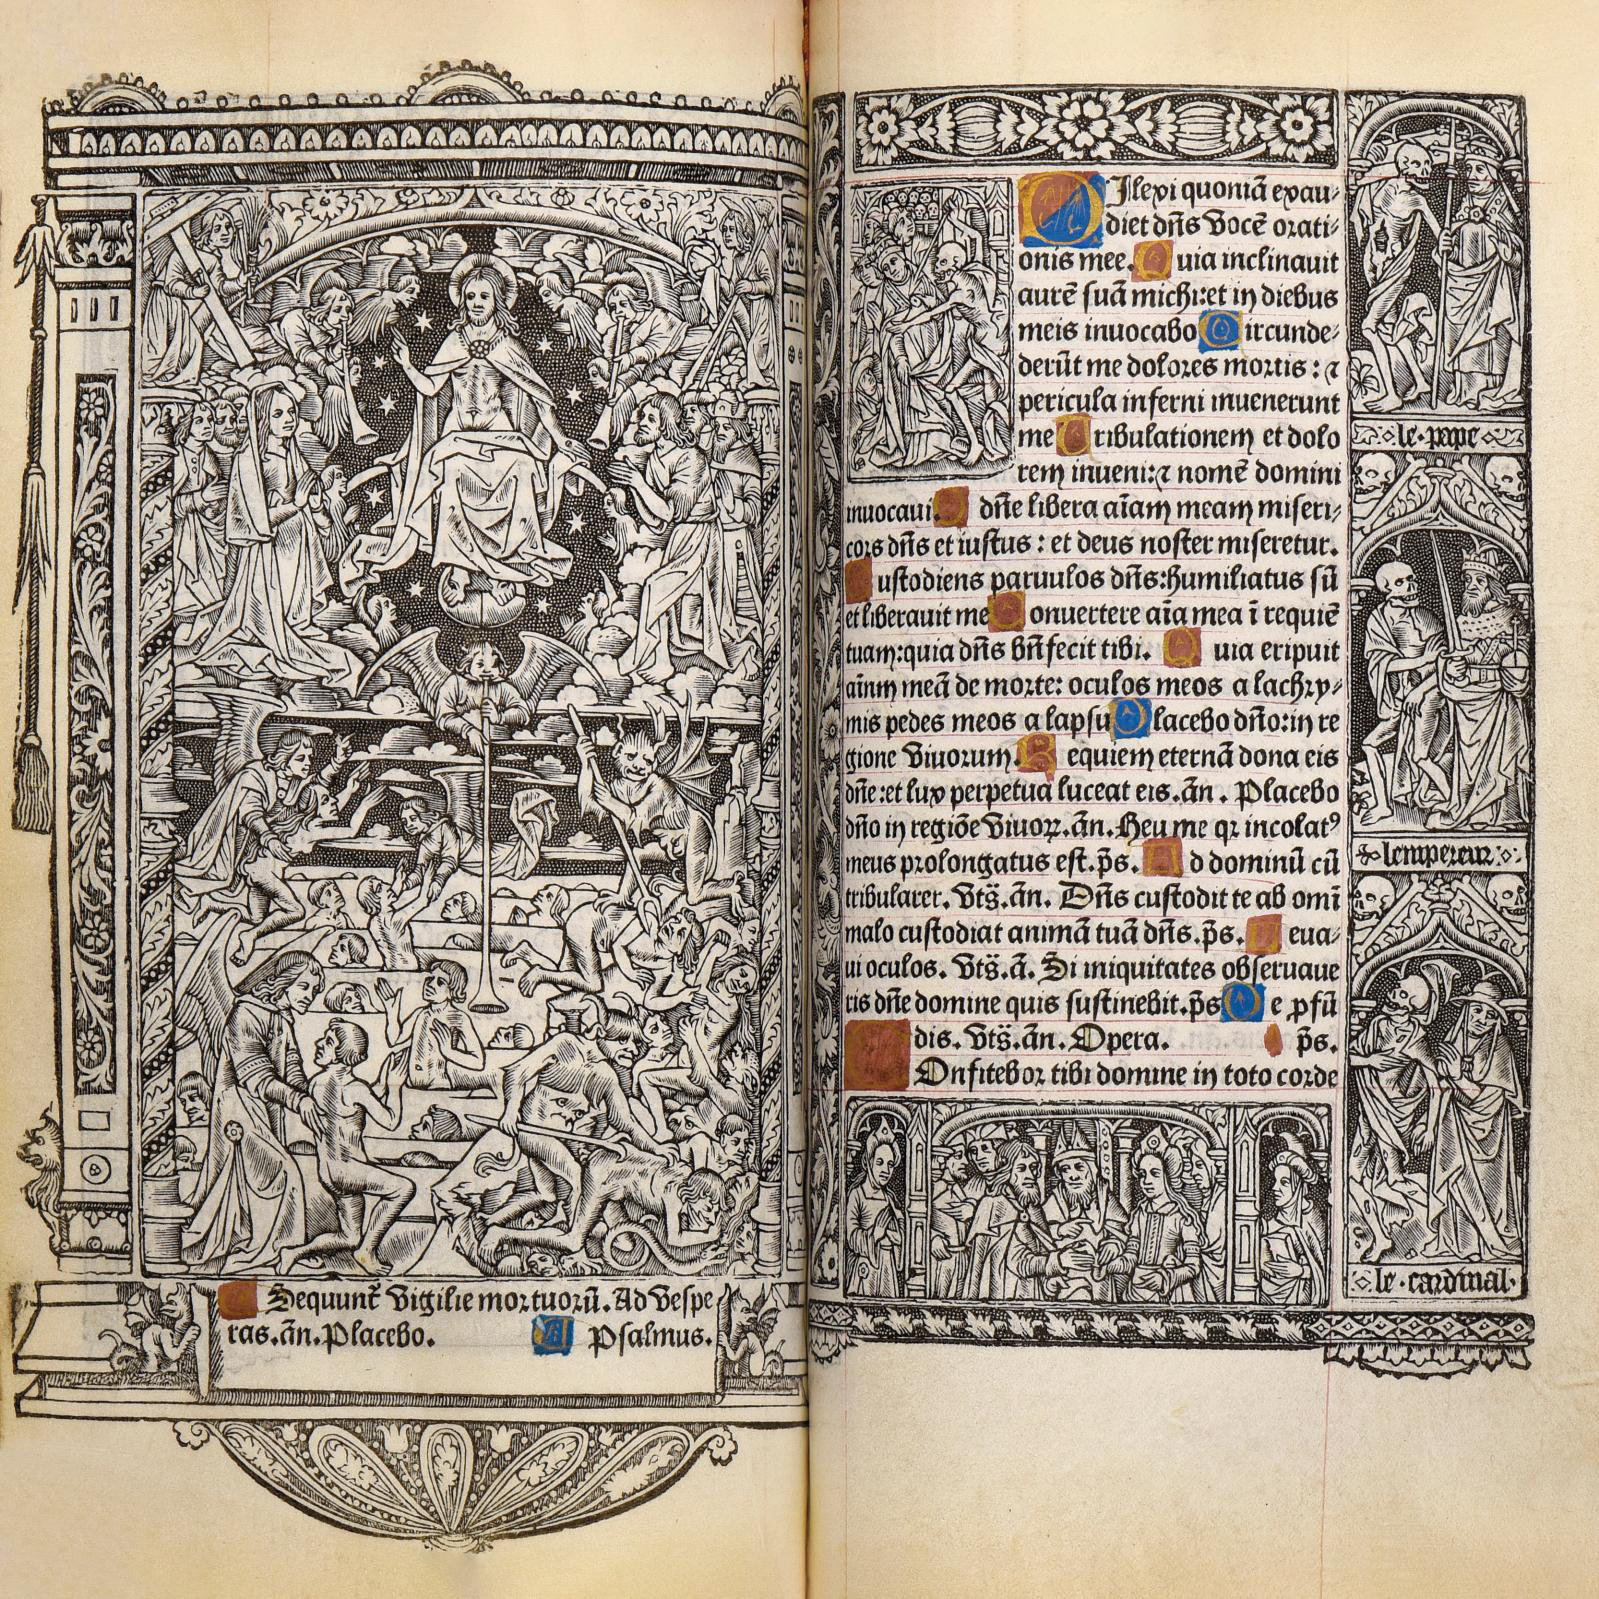 €37,500Simon Vostre, Paris, 1502. Book of Hours for the rite of Tournai. In Latin, Gothic 8vo format, printed on vellum, 120 unnumbered pa